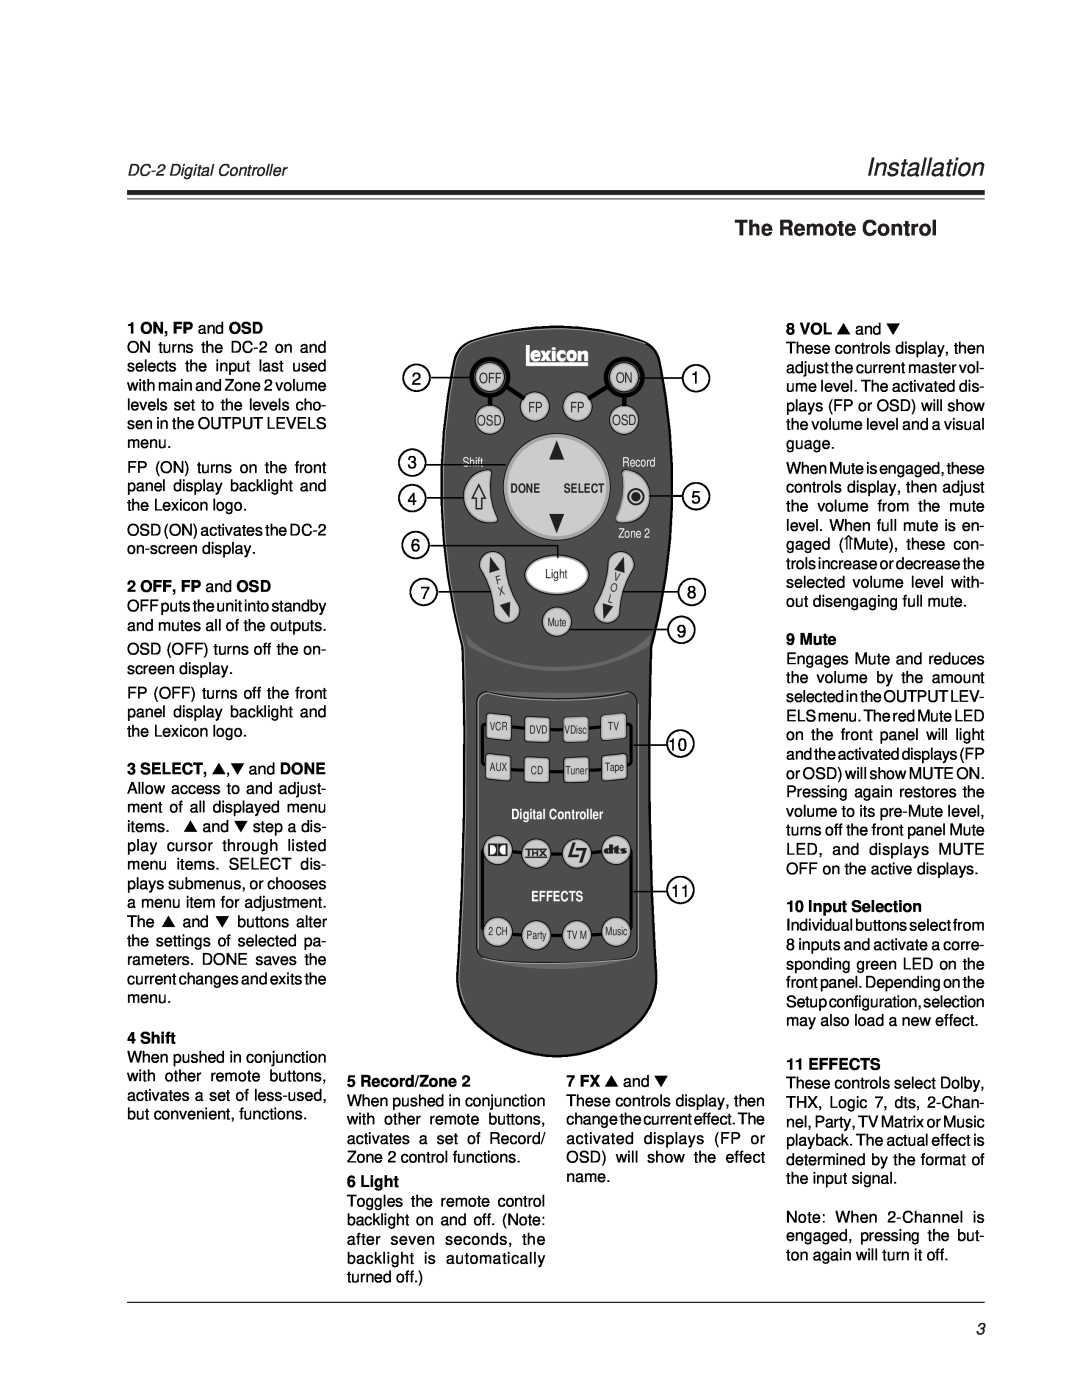 Lexicon DC-2 owner manual Installation, The Remote Control 